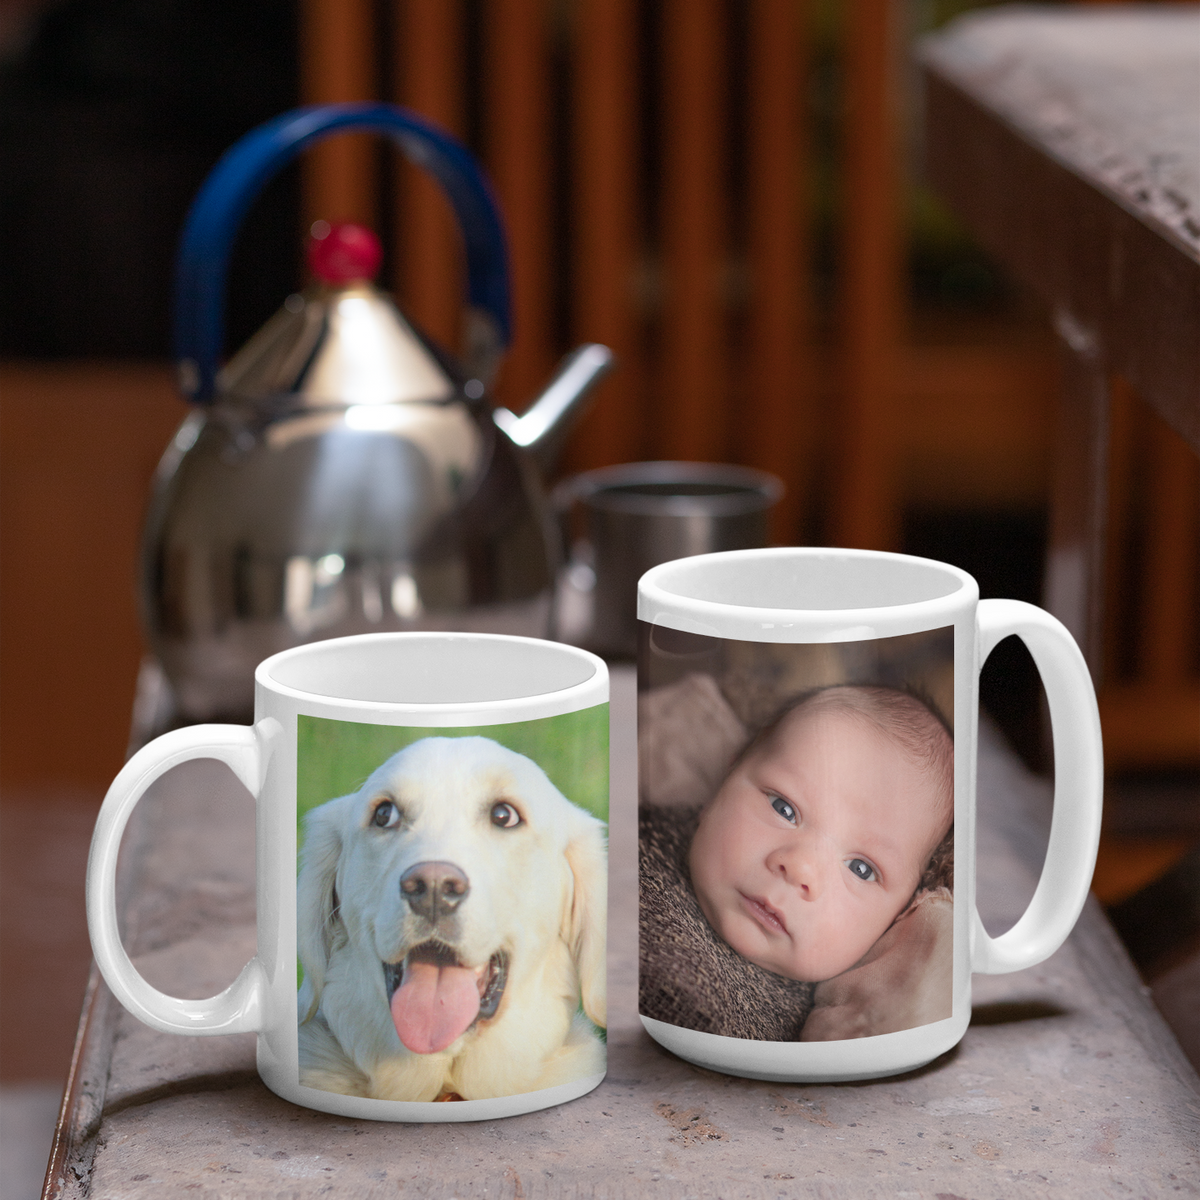 Personalized Custom Printed Photo or Text Ceramic Mugs - Gift Boxed